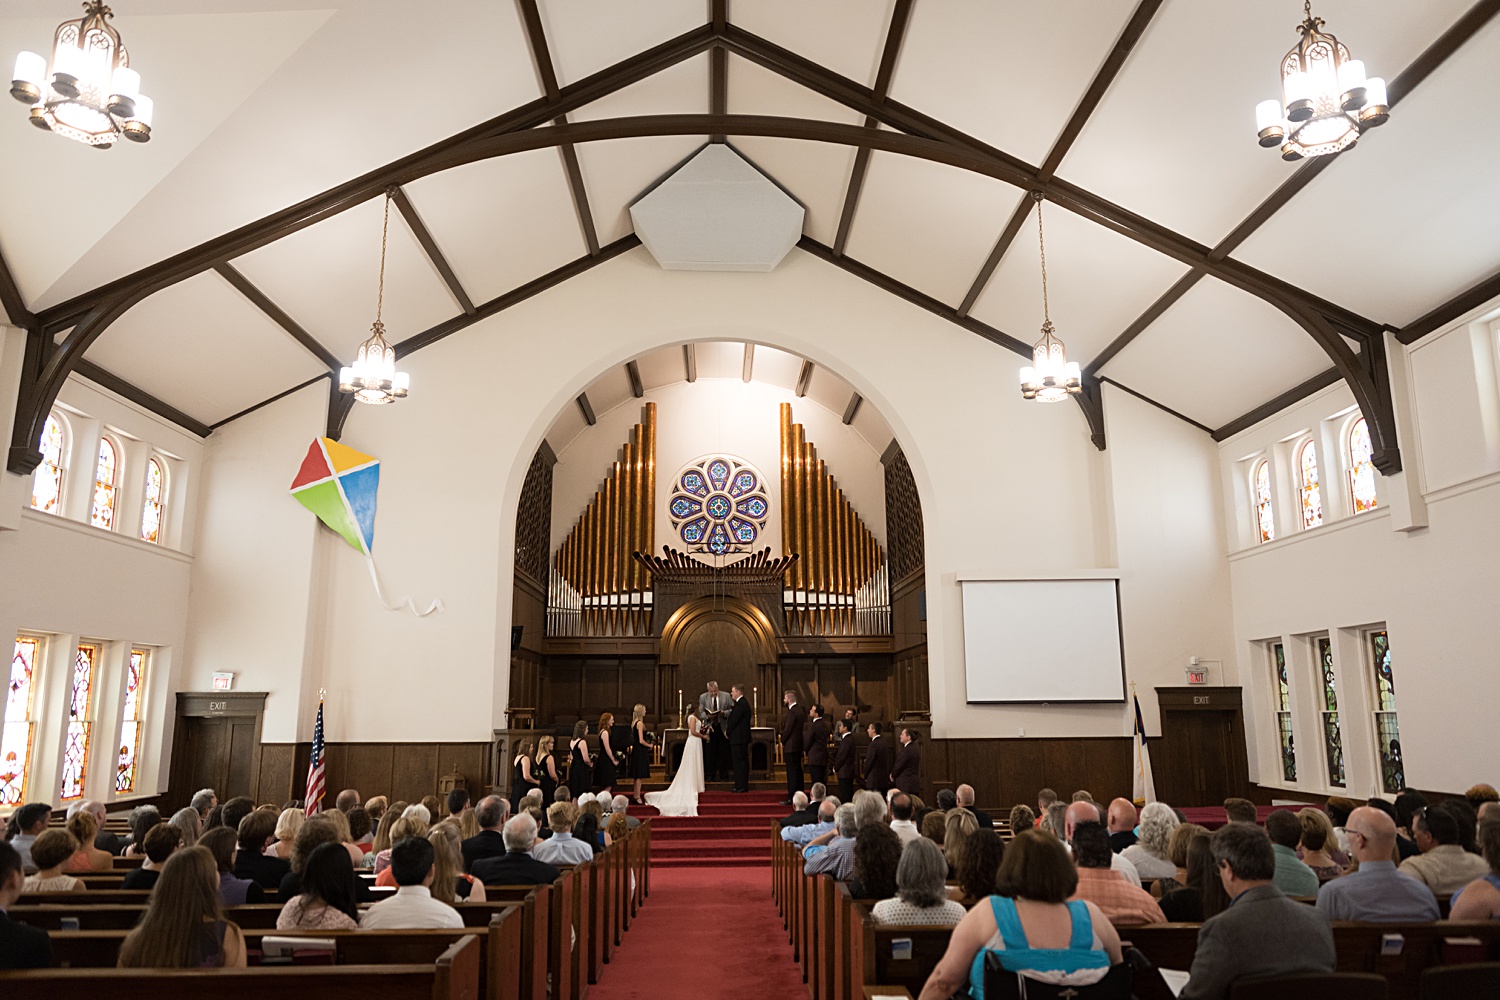 Wedding ceremony images at United Methodist Church in Lawrence, KS